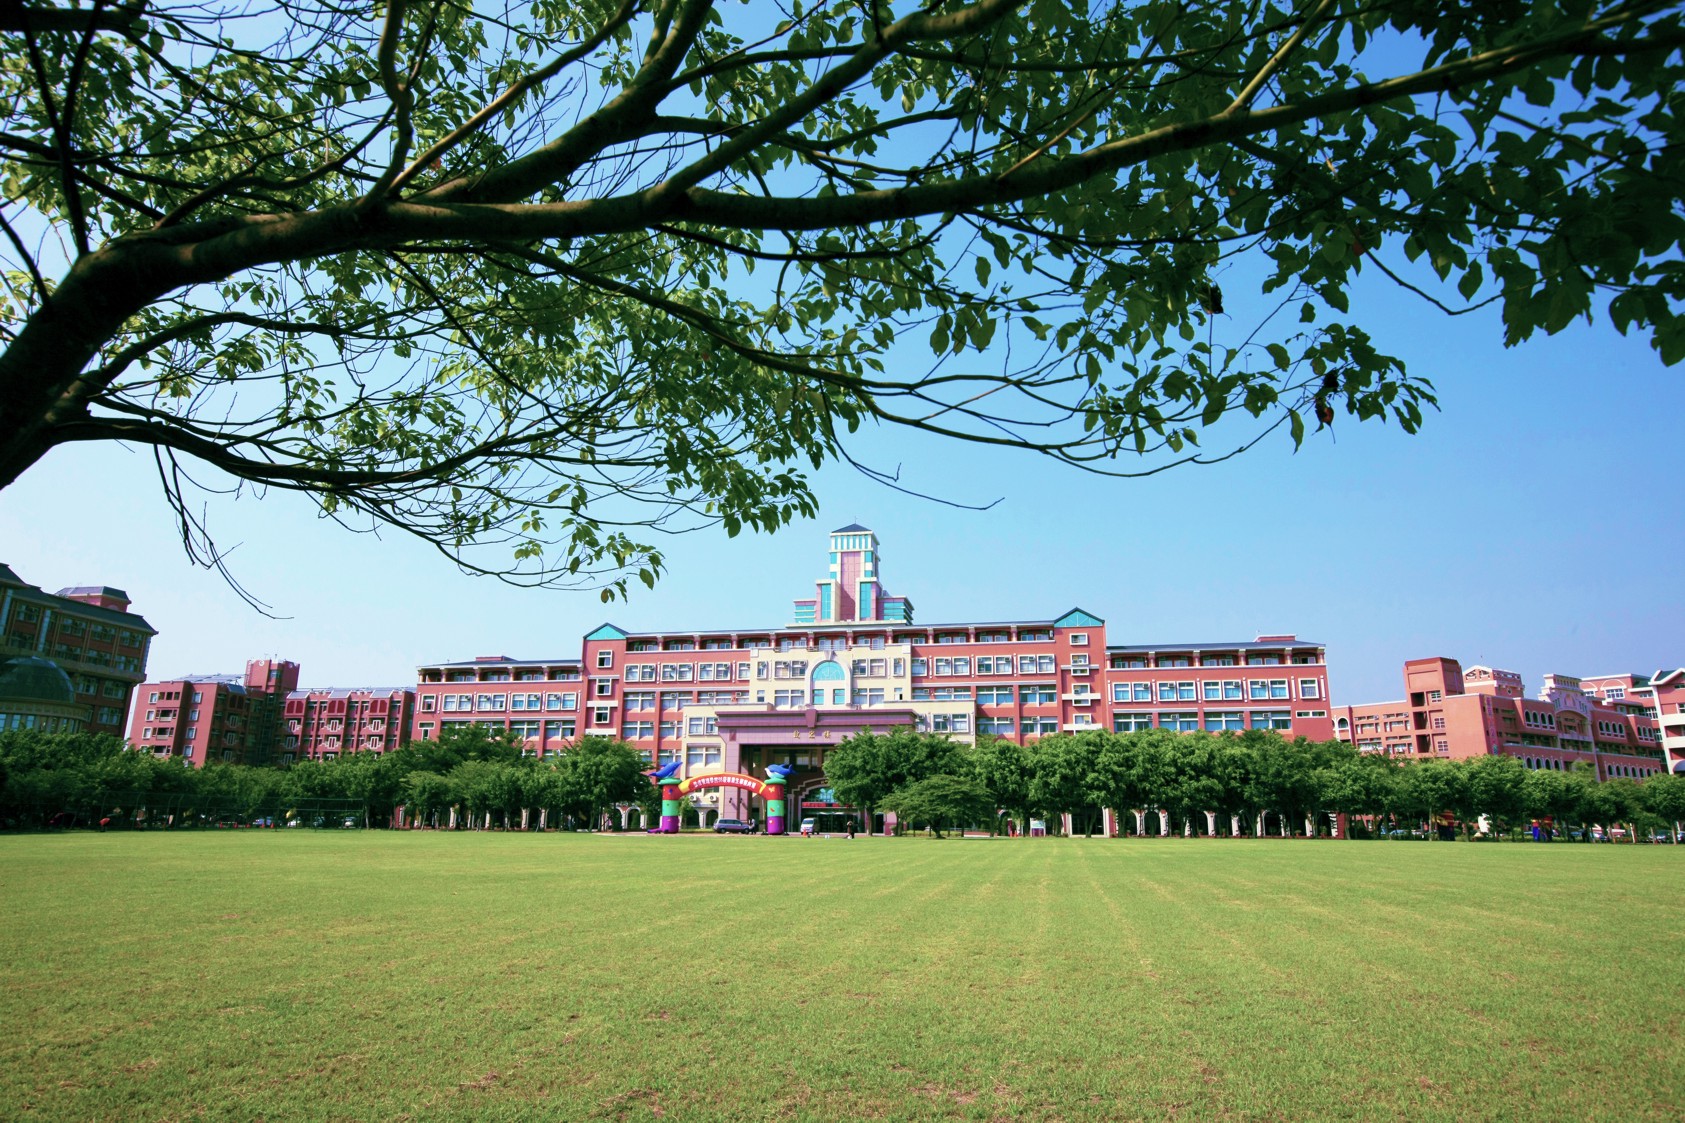 Zhiyuan Building (distant perspective of green space ahead)